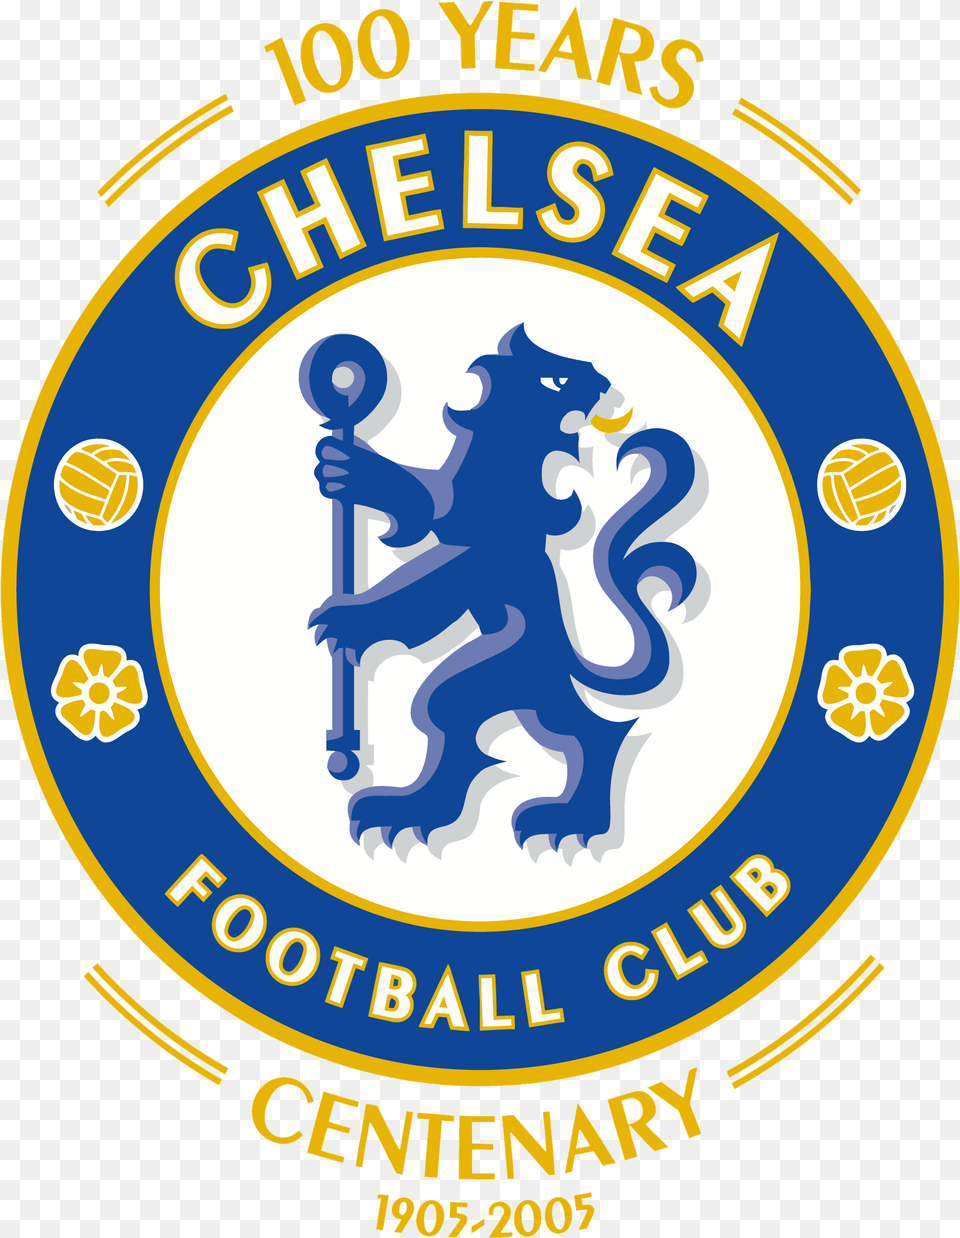 Chelsea Logo The Most Famous Brands And Company Logos In Chelsea Fc, Emblem, Symbol, Badge, Architecture Png